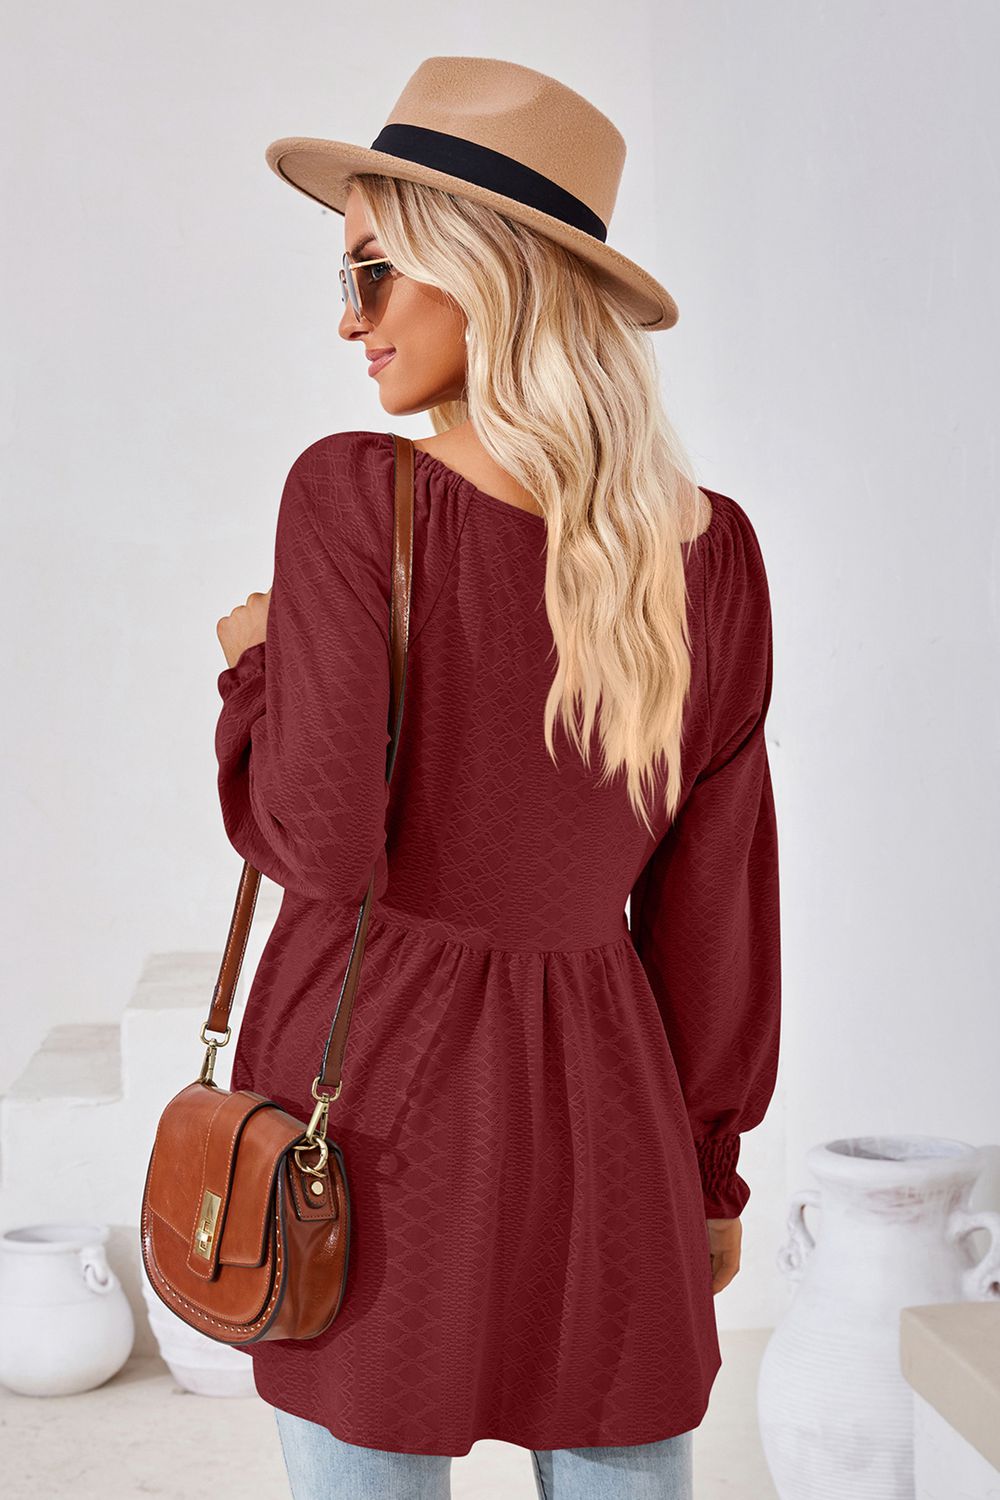 V-Neck Lantern Sleeve Blouse - Women’s Clothing & Accessories - Shirts & Tops - 18 - 2024